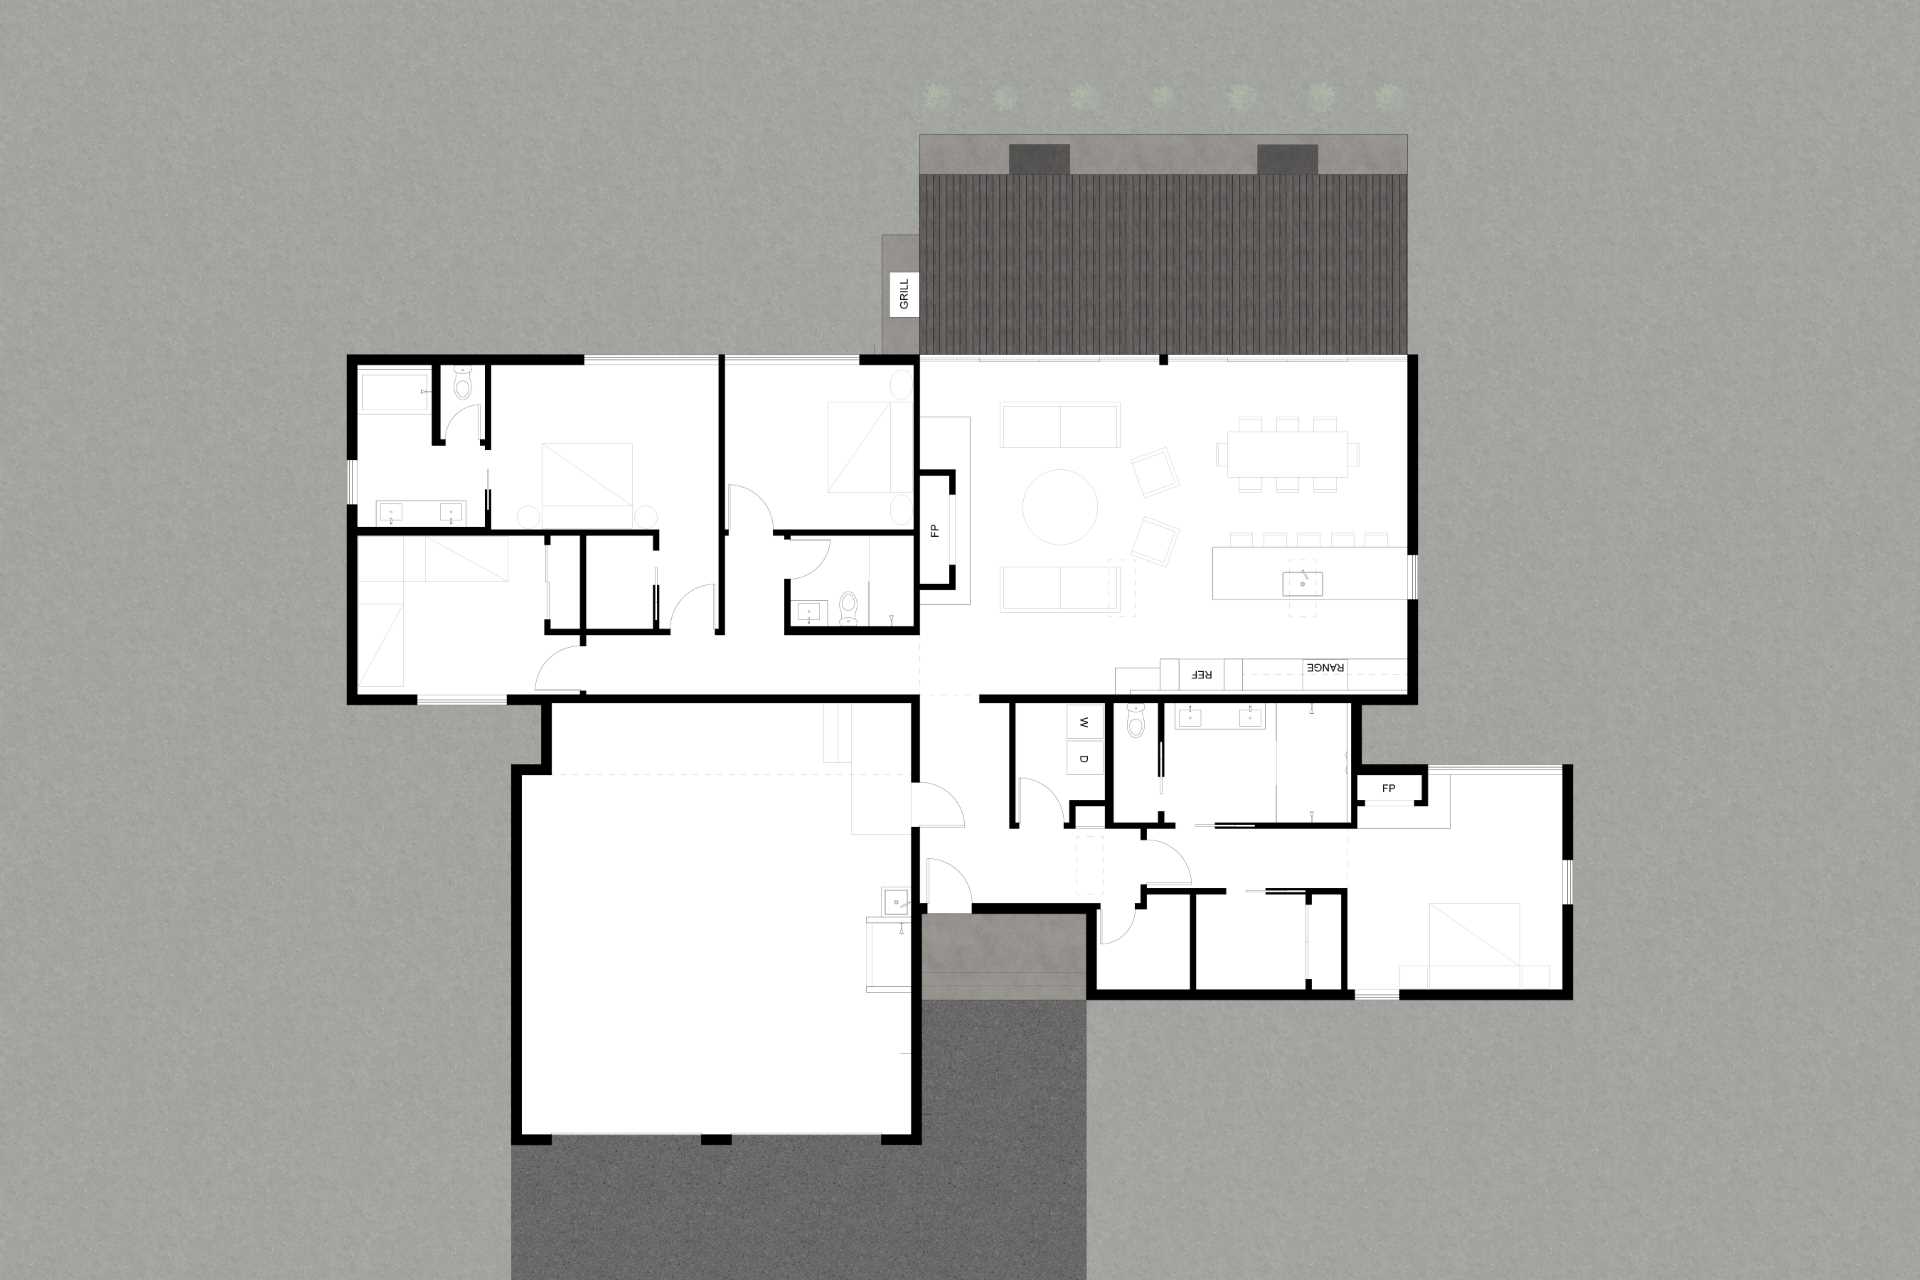 The site plan and layout for a modern house.